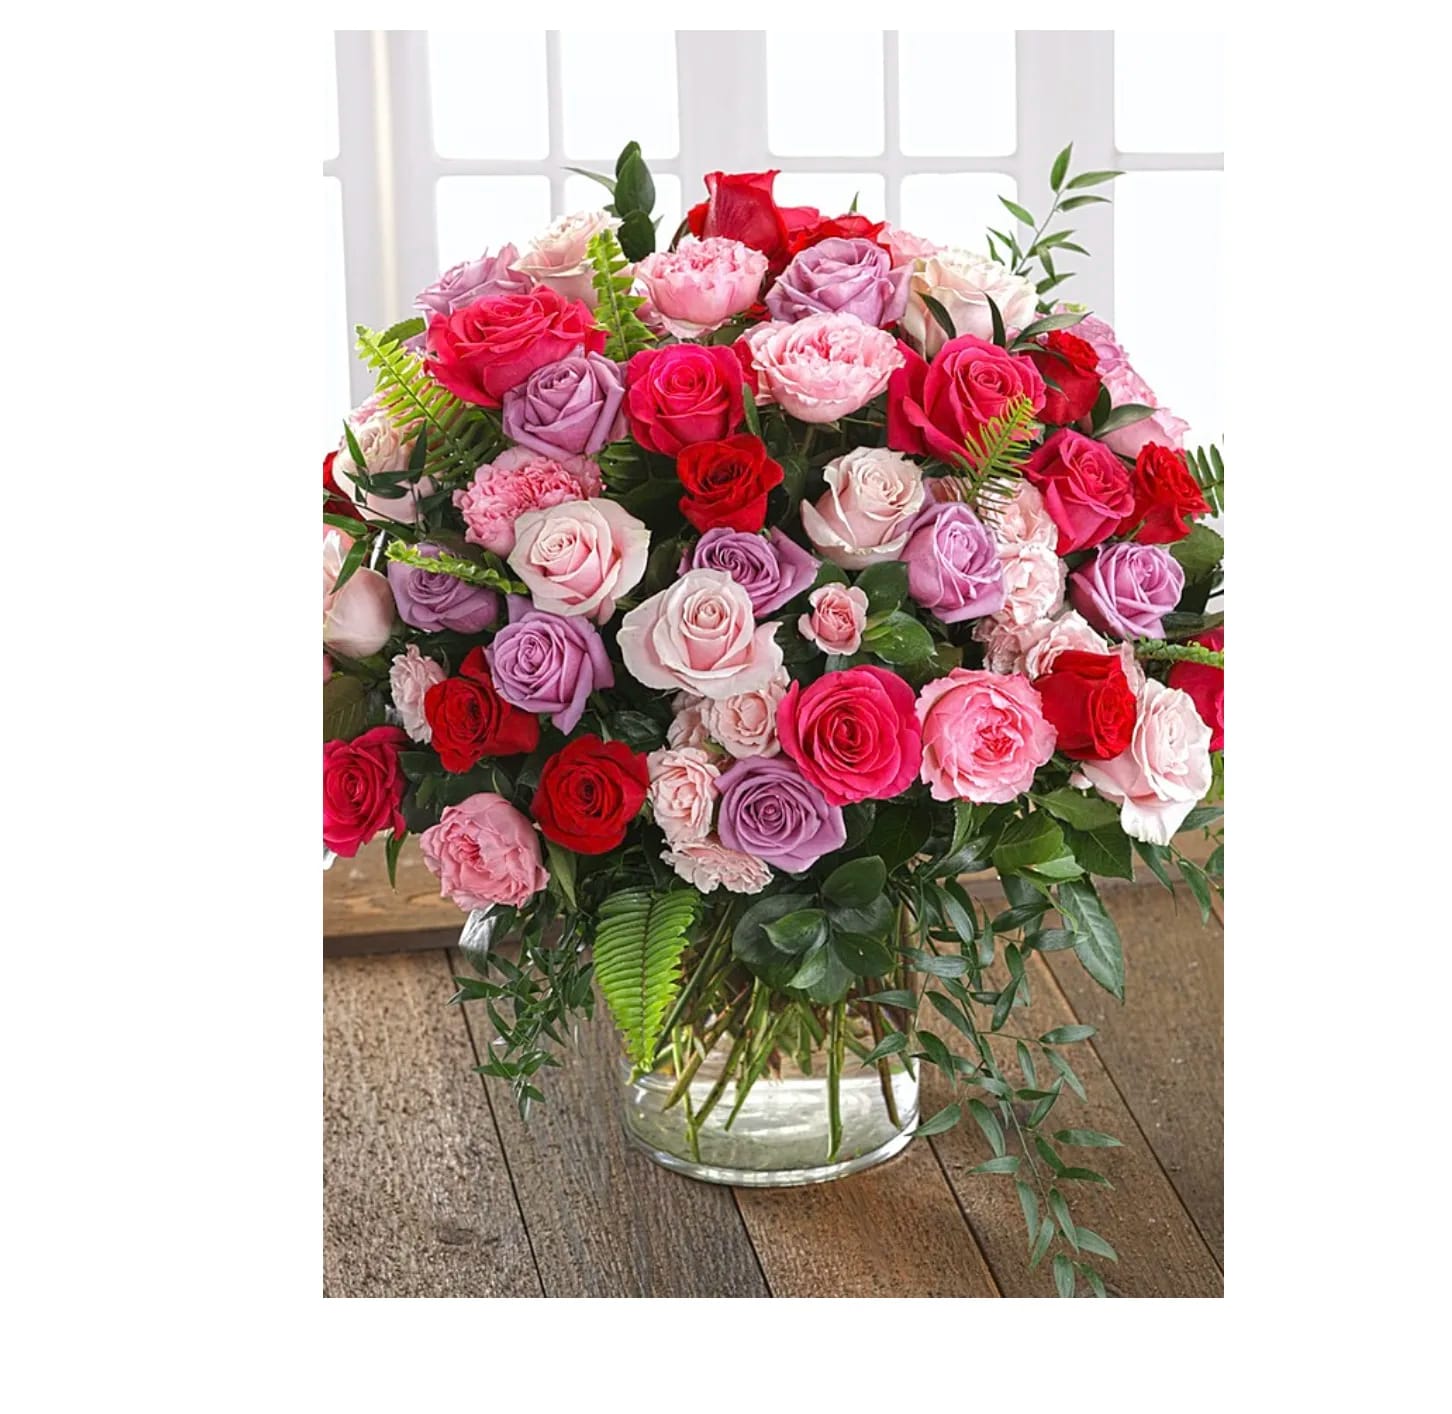 Luxe Rose Kaleidoscope 50 - Product Description: Unleash the ultimate expression of love with our &quot;Luxe Rose Kaleidoscope&quot; – a dazzling bouquet featuring over 100 luxury rose blooms in a vibrant mix of hot pink, light pink, hot red, white, and regal purple. This opulent arrangement includes Ecuadorian Mountain Roses, Cottage Garden Roses, and Wild Spray Roses, creating a spectacular display nestled in lush foliage. Perfect for Valentine's Day or any occasion where love takes center stage, this bouquet transcends traditional boundaries. Deliver a kaleidoscope of emotions with the &quot;Luxe Rose Kaleidoscope,&quot; a luxurious gesture that speaks volumes of your affection and appreciation.